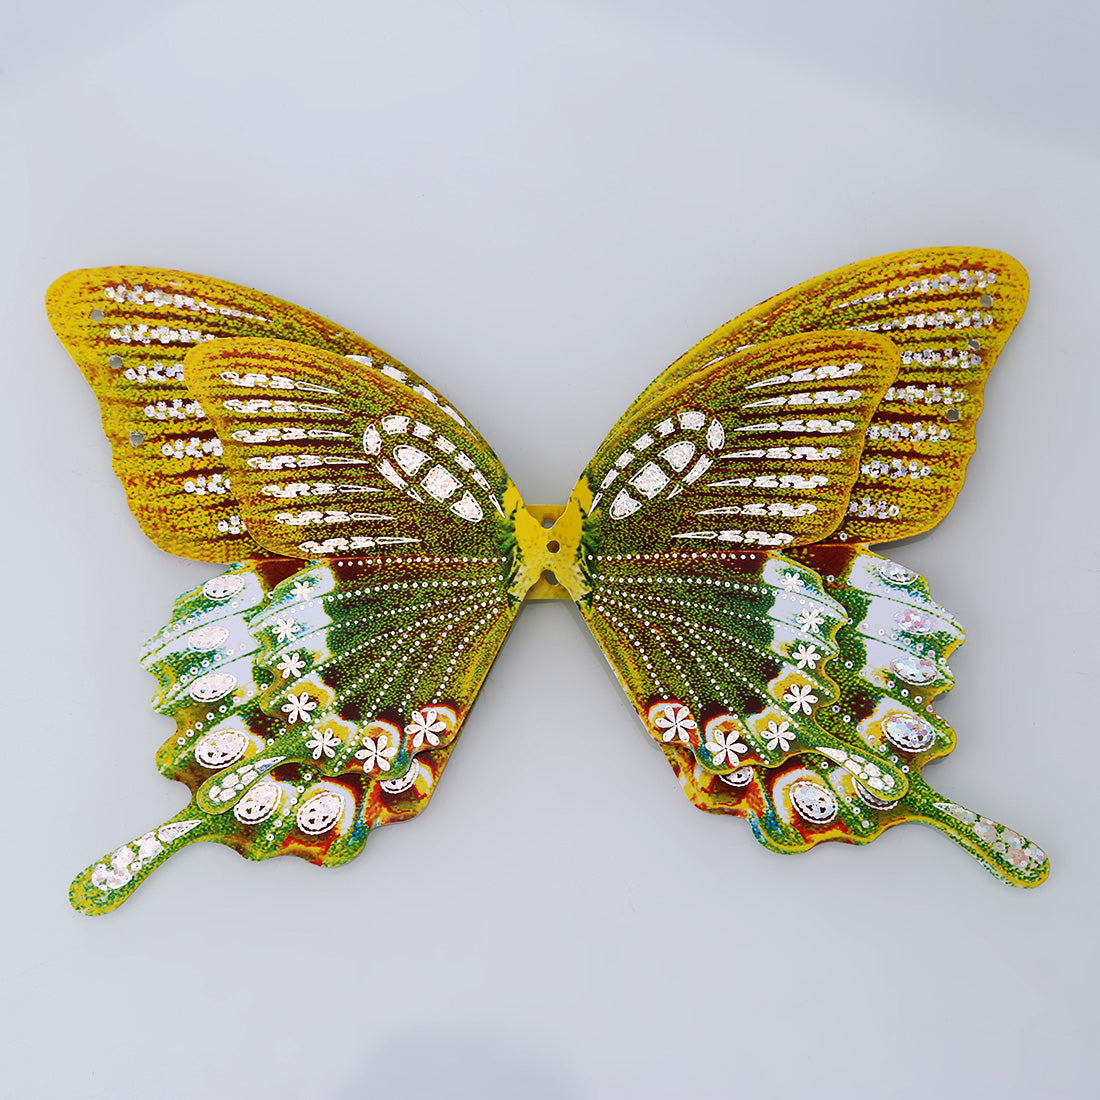 100, 500 or 1,000 Pieces: 304 Gold Stainless Steel Metal Butterfly